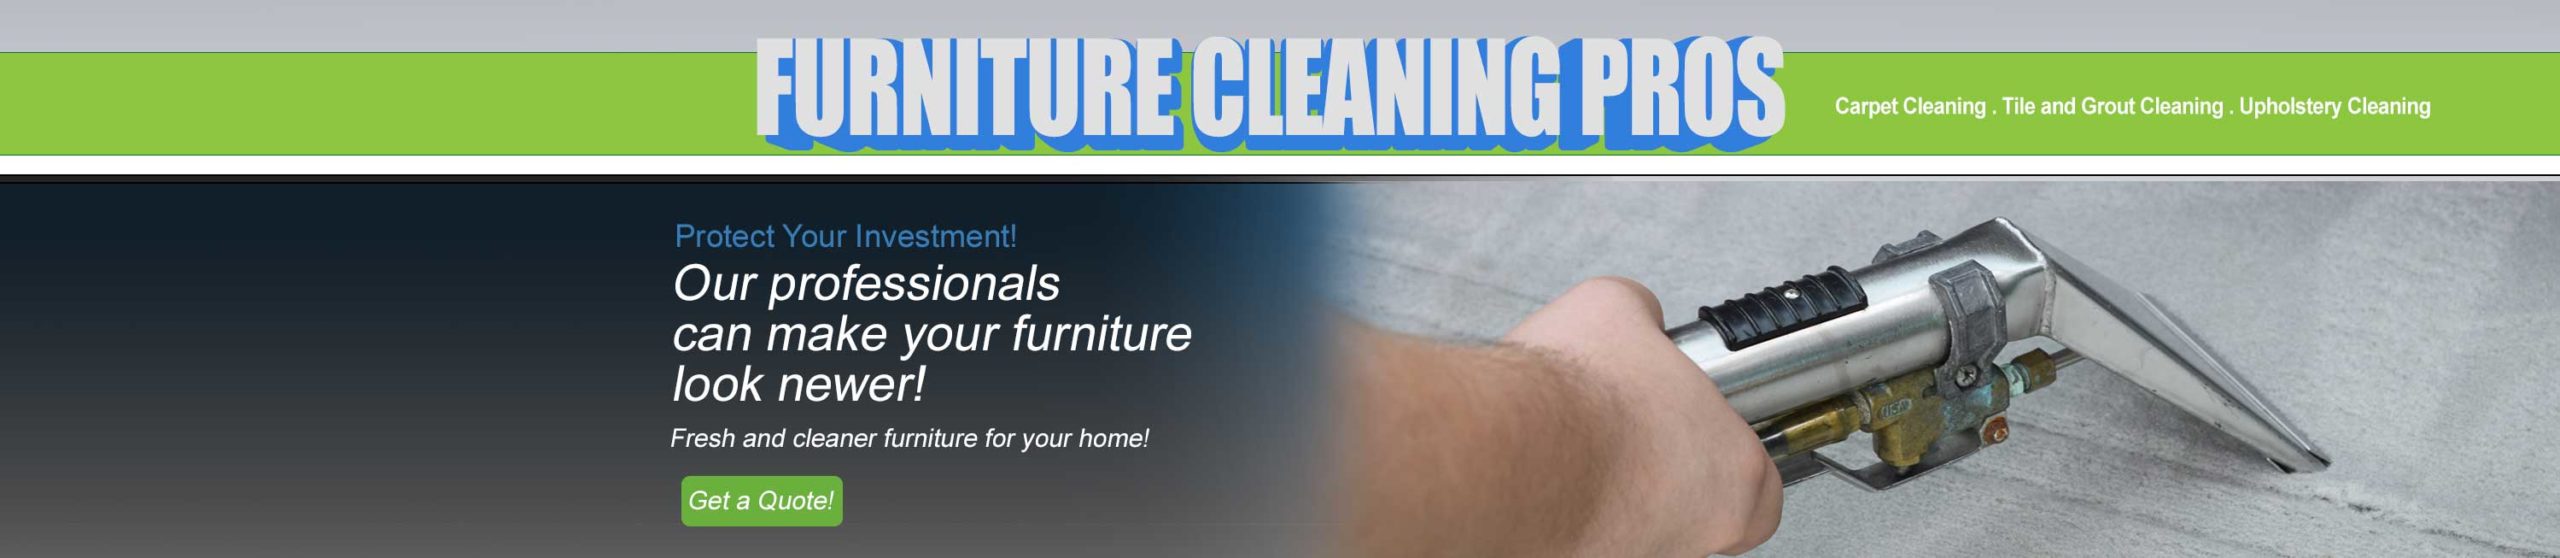 Furniture and upholstery cleaning in San Tan Valley AZ